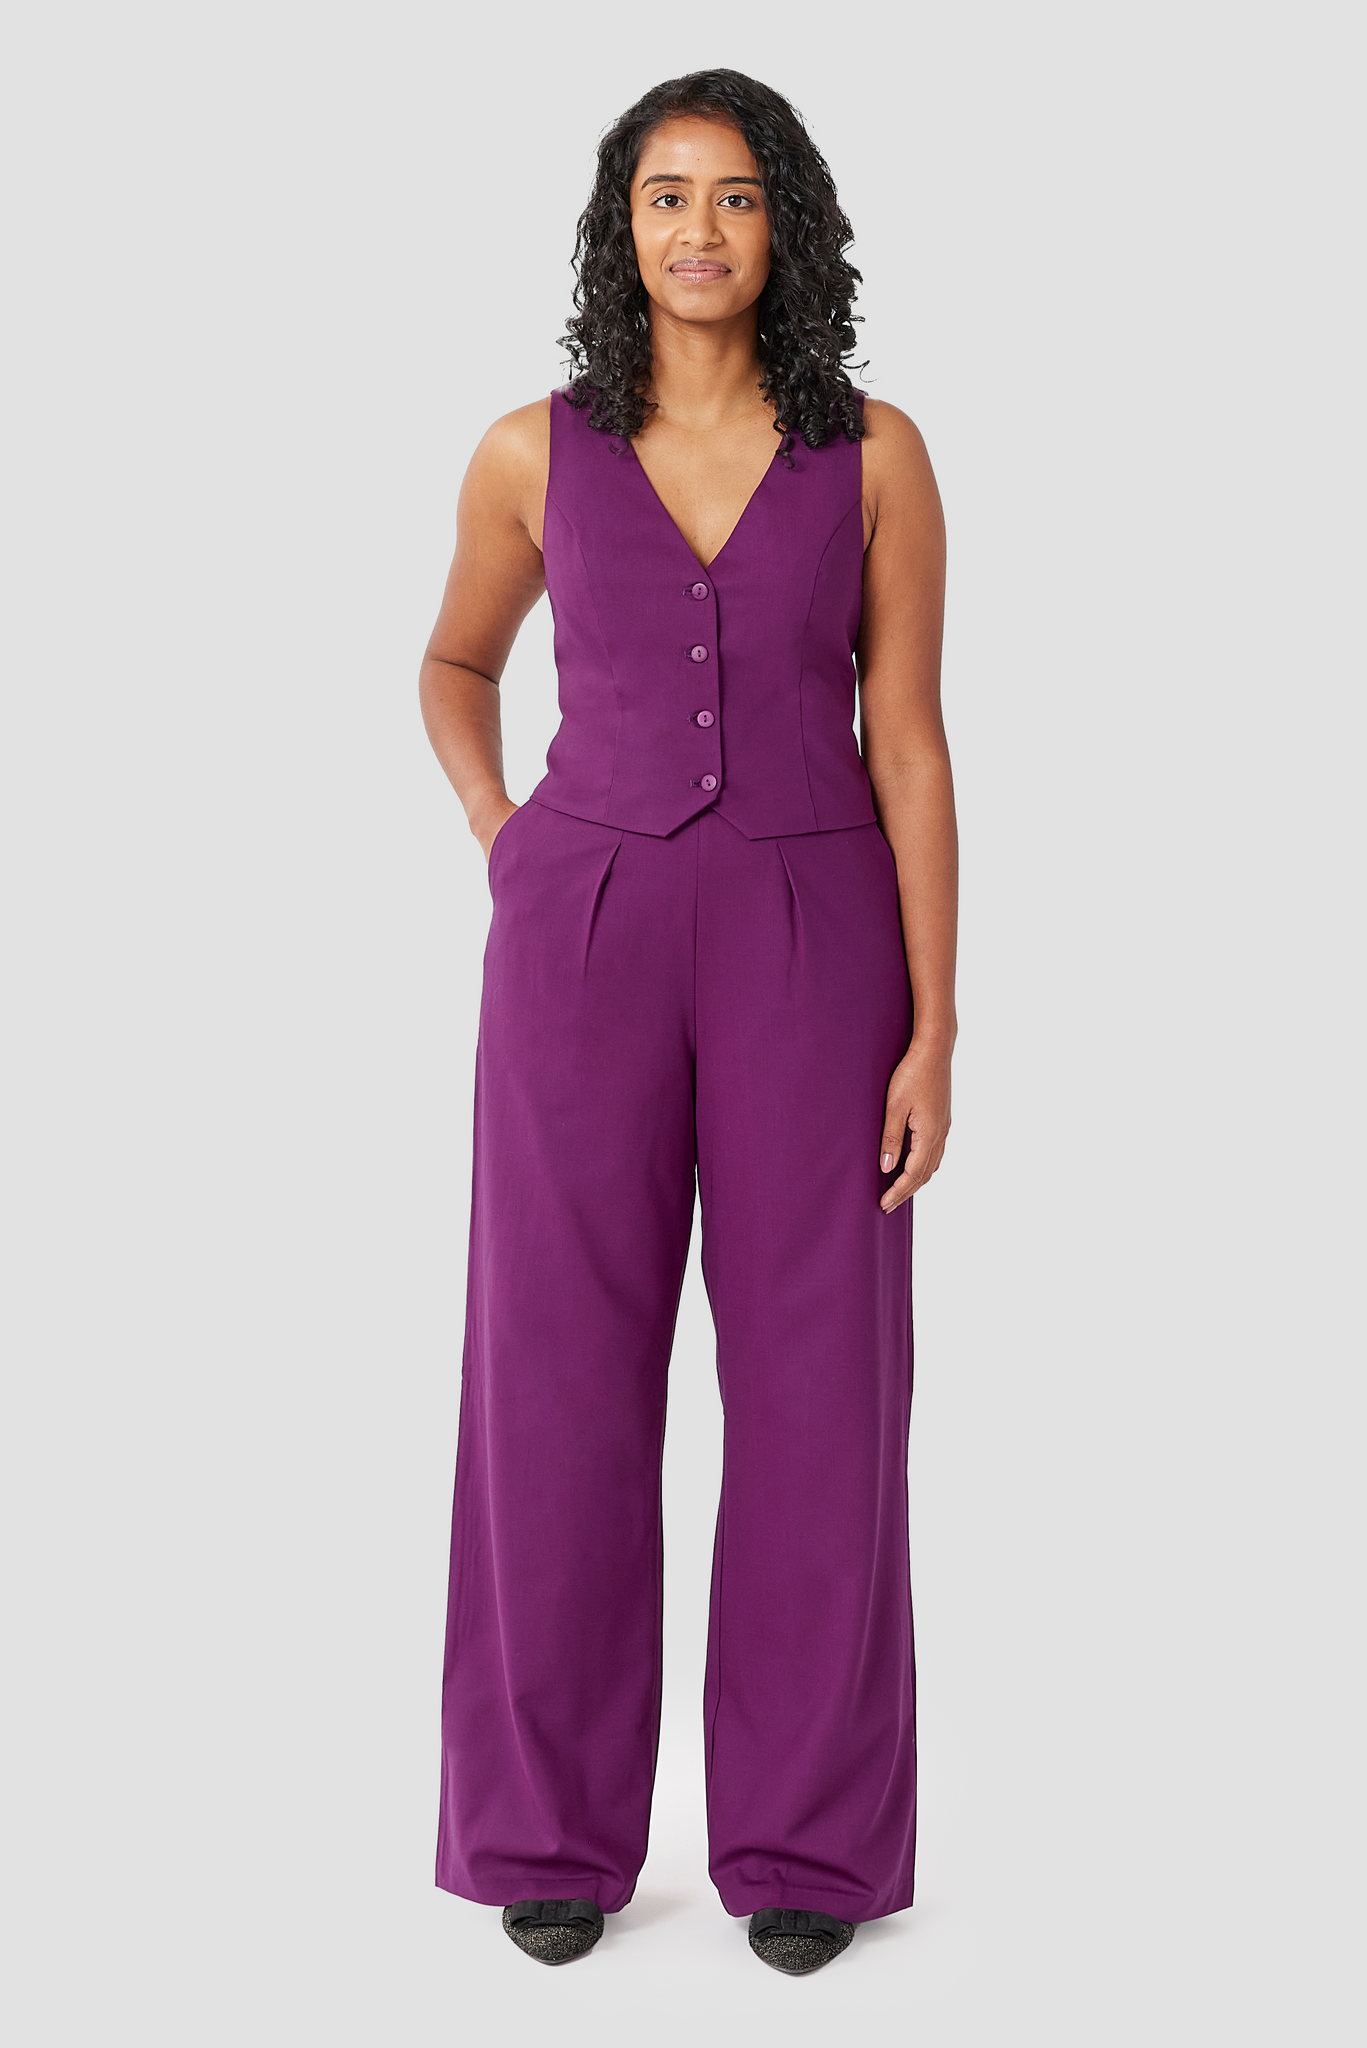 The Wool Vest is a beautiful, striking cropped vest made from a warm 96% wool and 4% stretch for comfort. It is fully lined with a smooth organic cotton lining, and pairs perfectly with the high waisted Wool Wide Leg Pant by Aam. Shown here is the gorgeous plum color. 